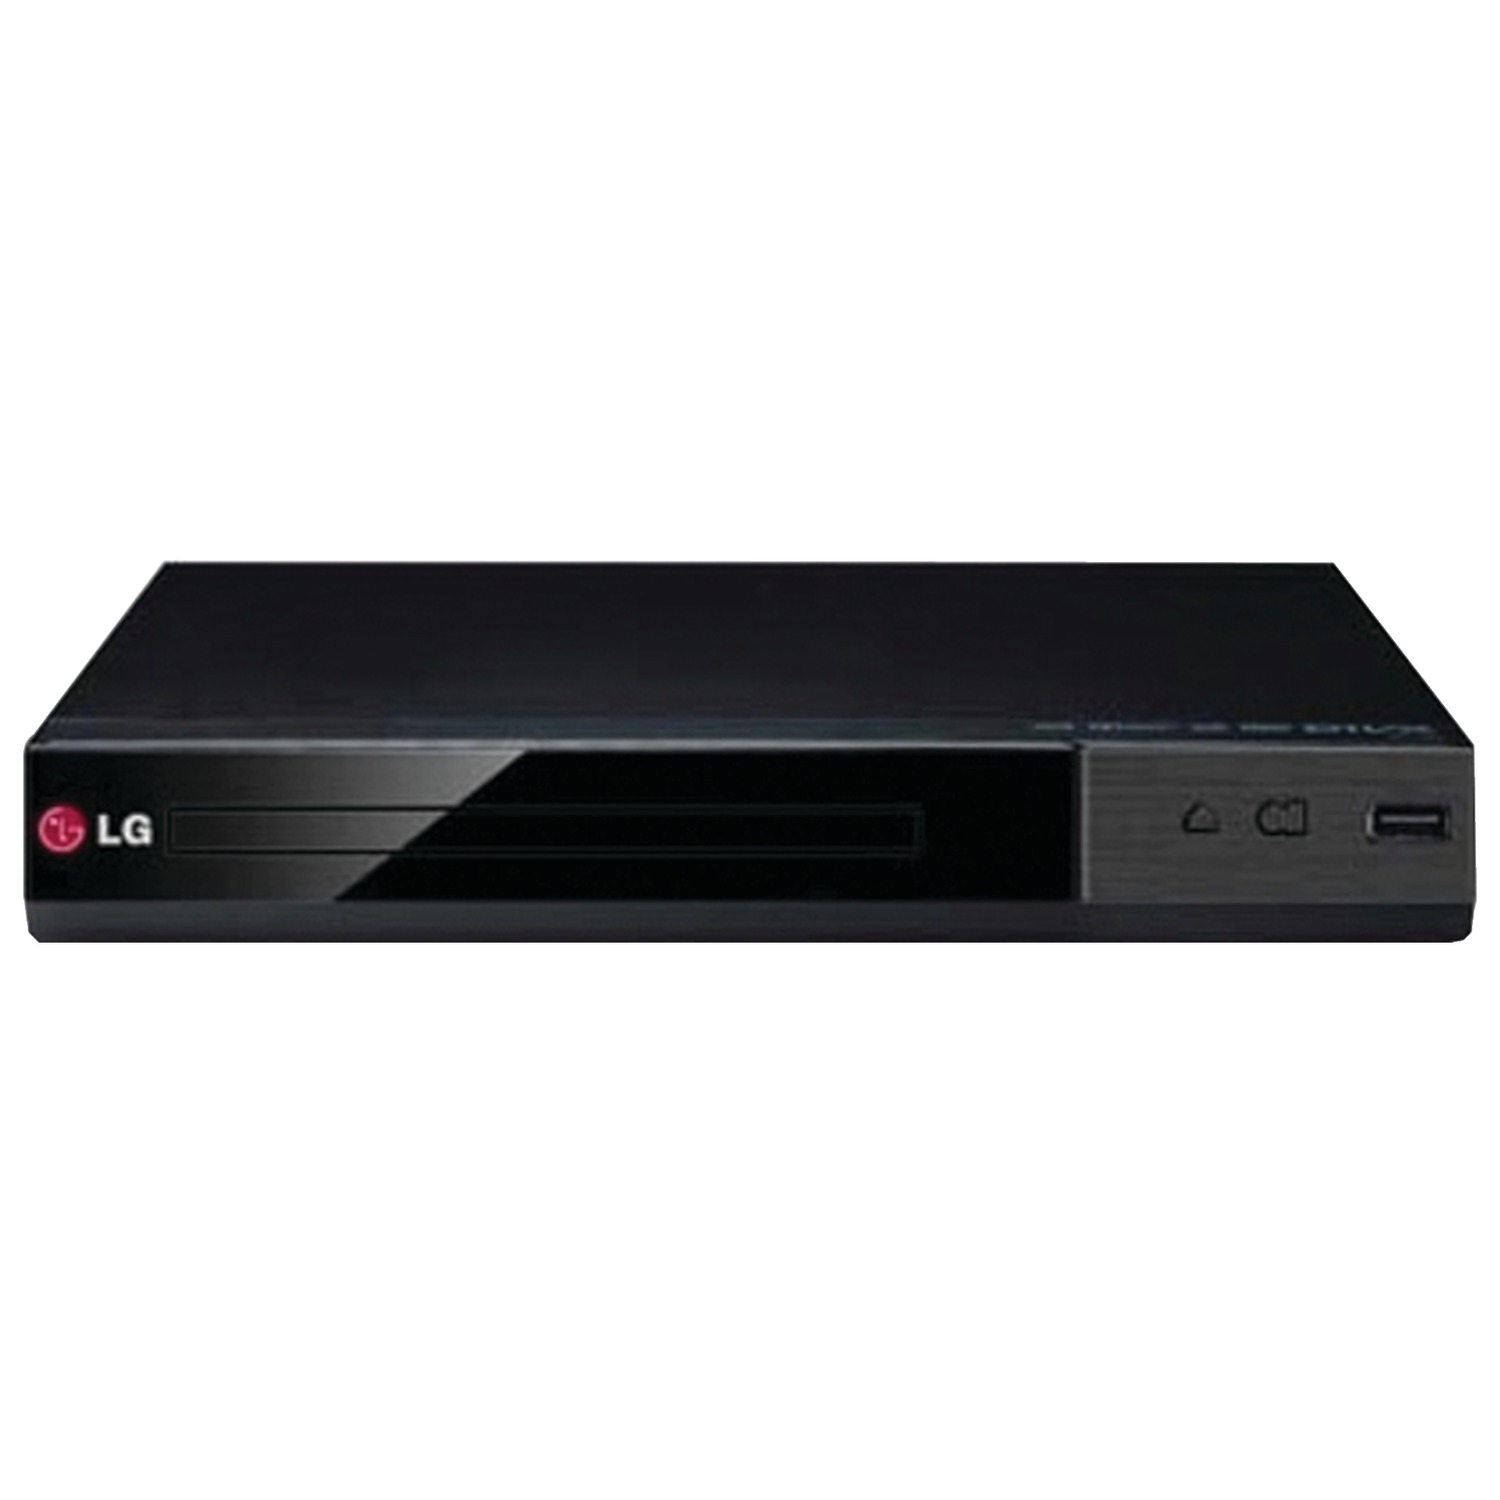 LG DP132 DVD Player With USB Direct Recording & UPG AA 50 Pack - image 2 of 3